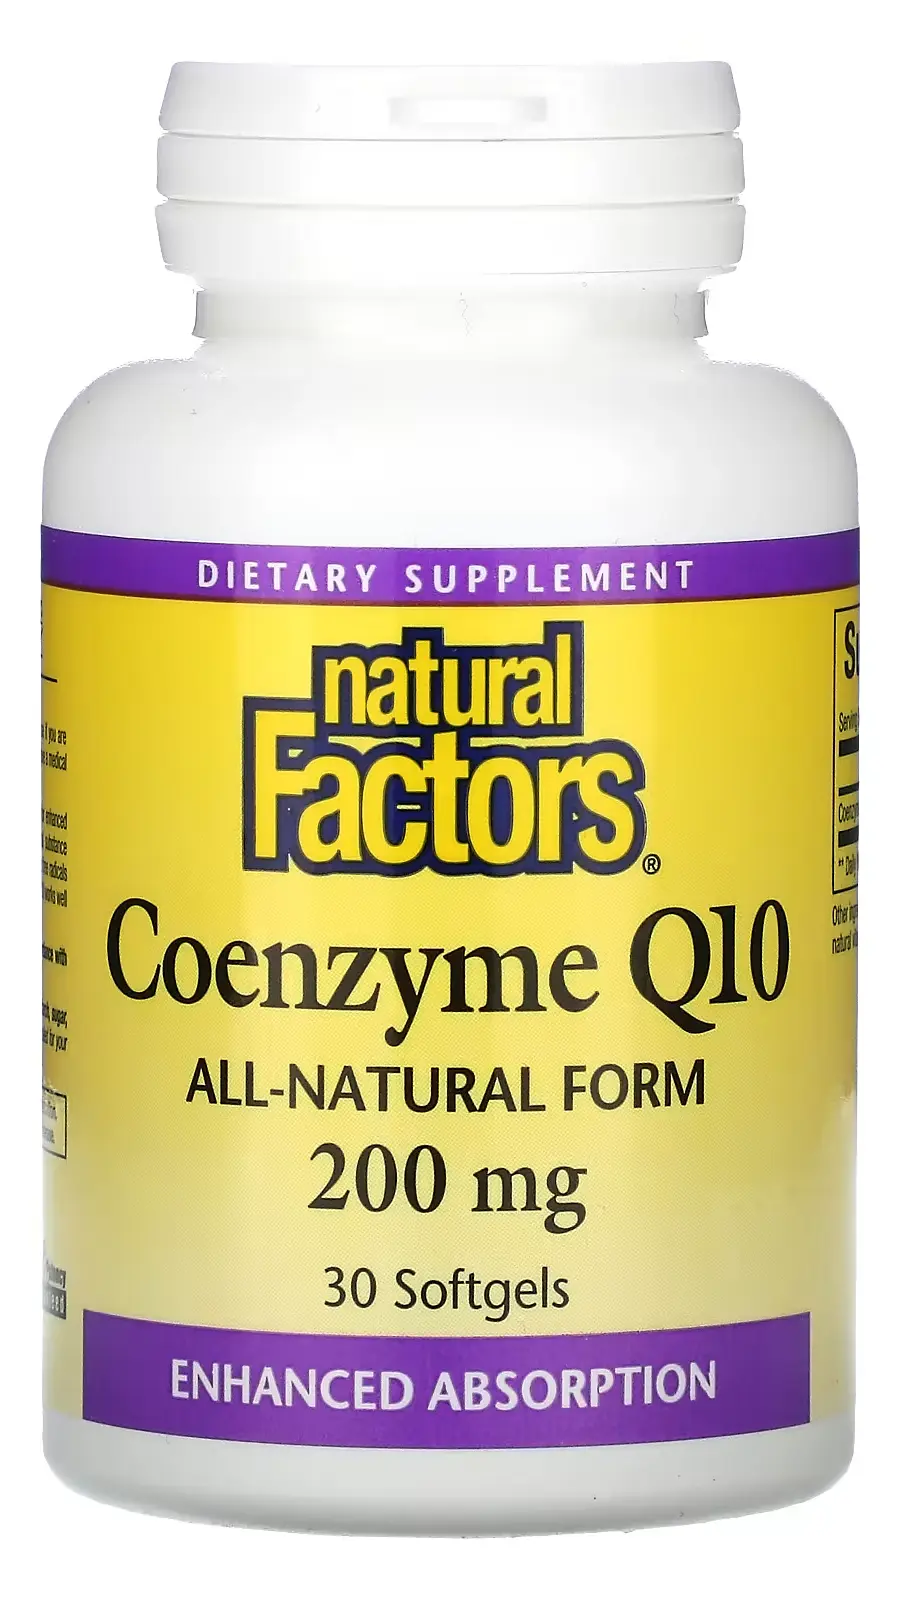 БАД Natural Factors Coenzyme Q10, 200 мг, 30 капсул (NFS-20721)